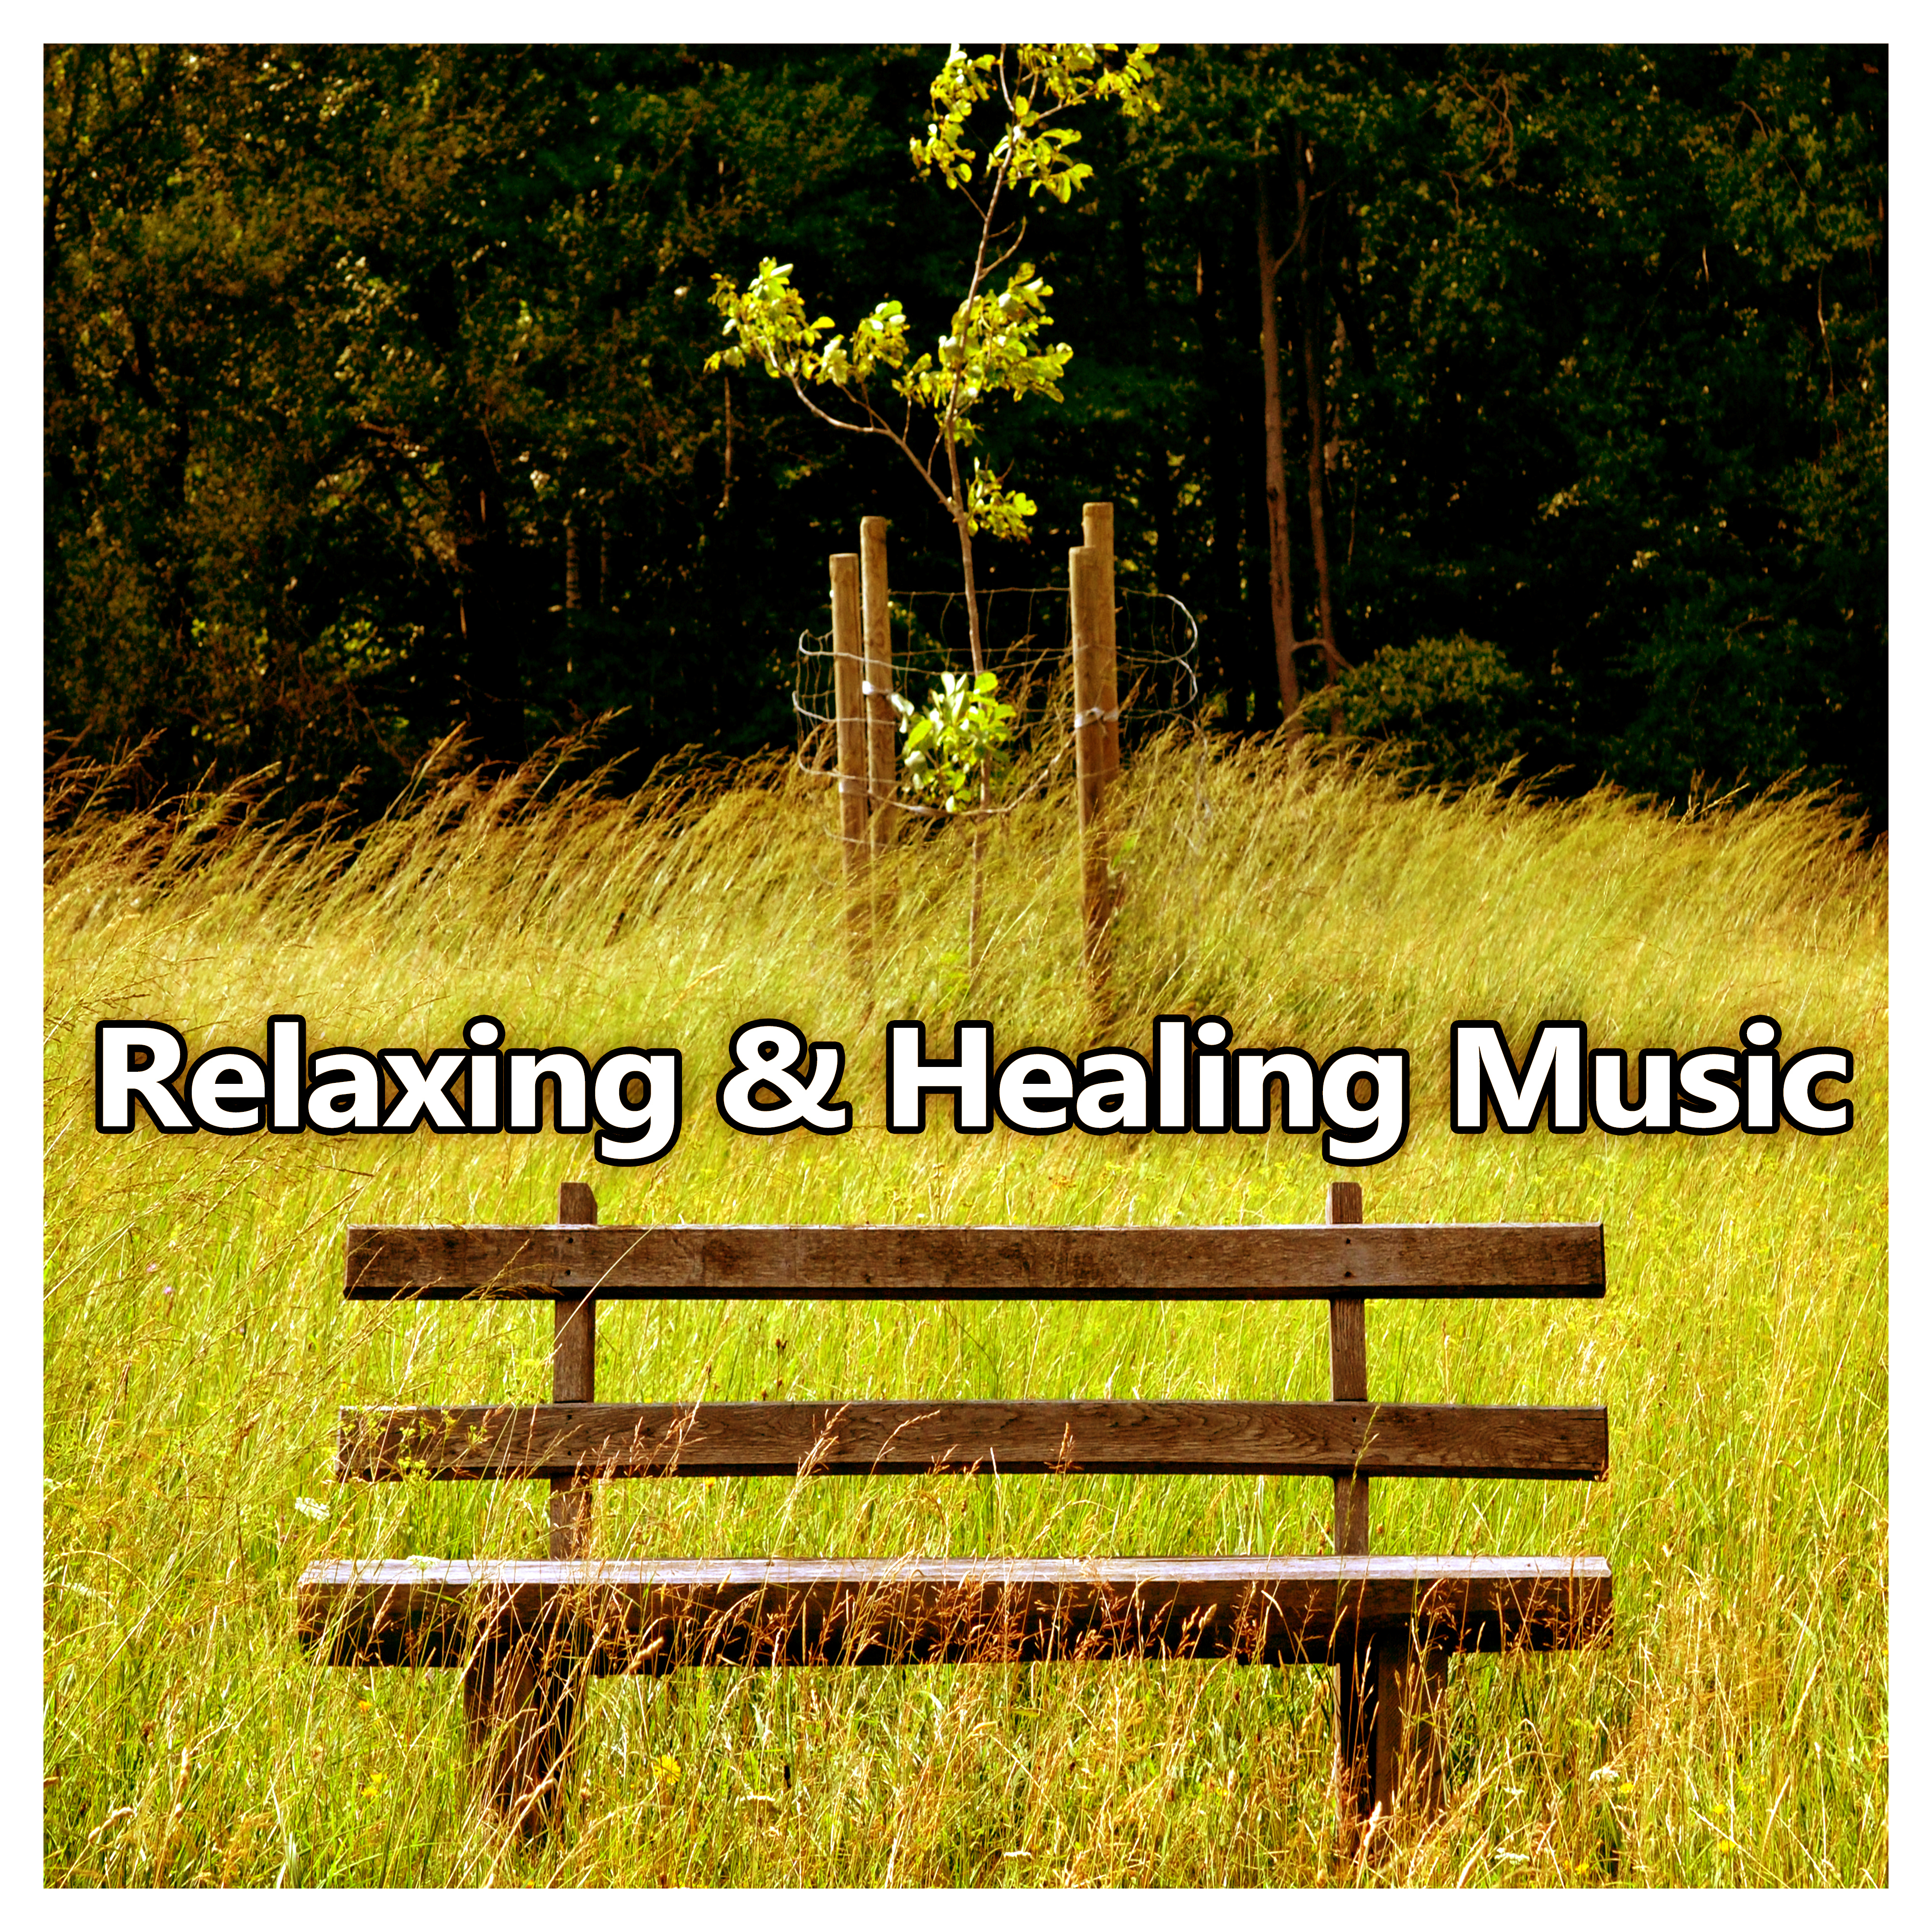 Relaxing  Healing Music  Soft Nature Sounds for Relax, Chill Yourself, Calming Music, Rest a Bit